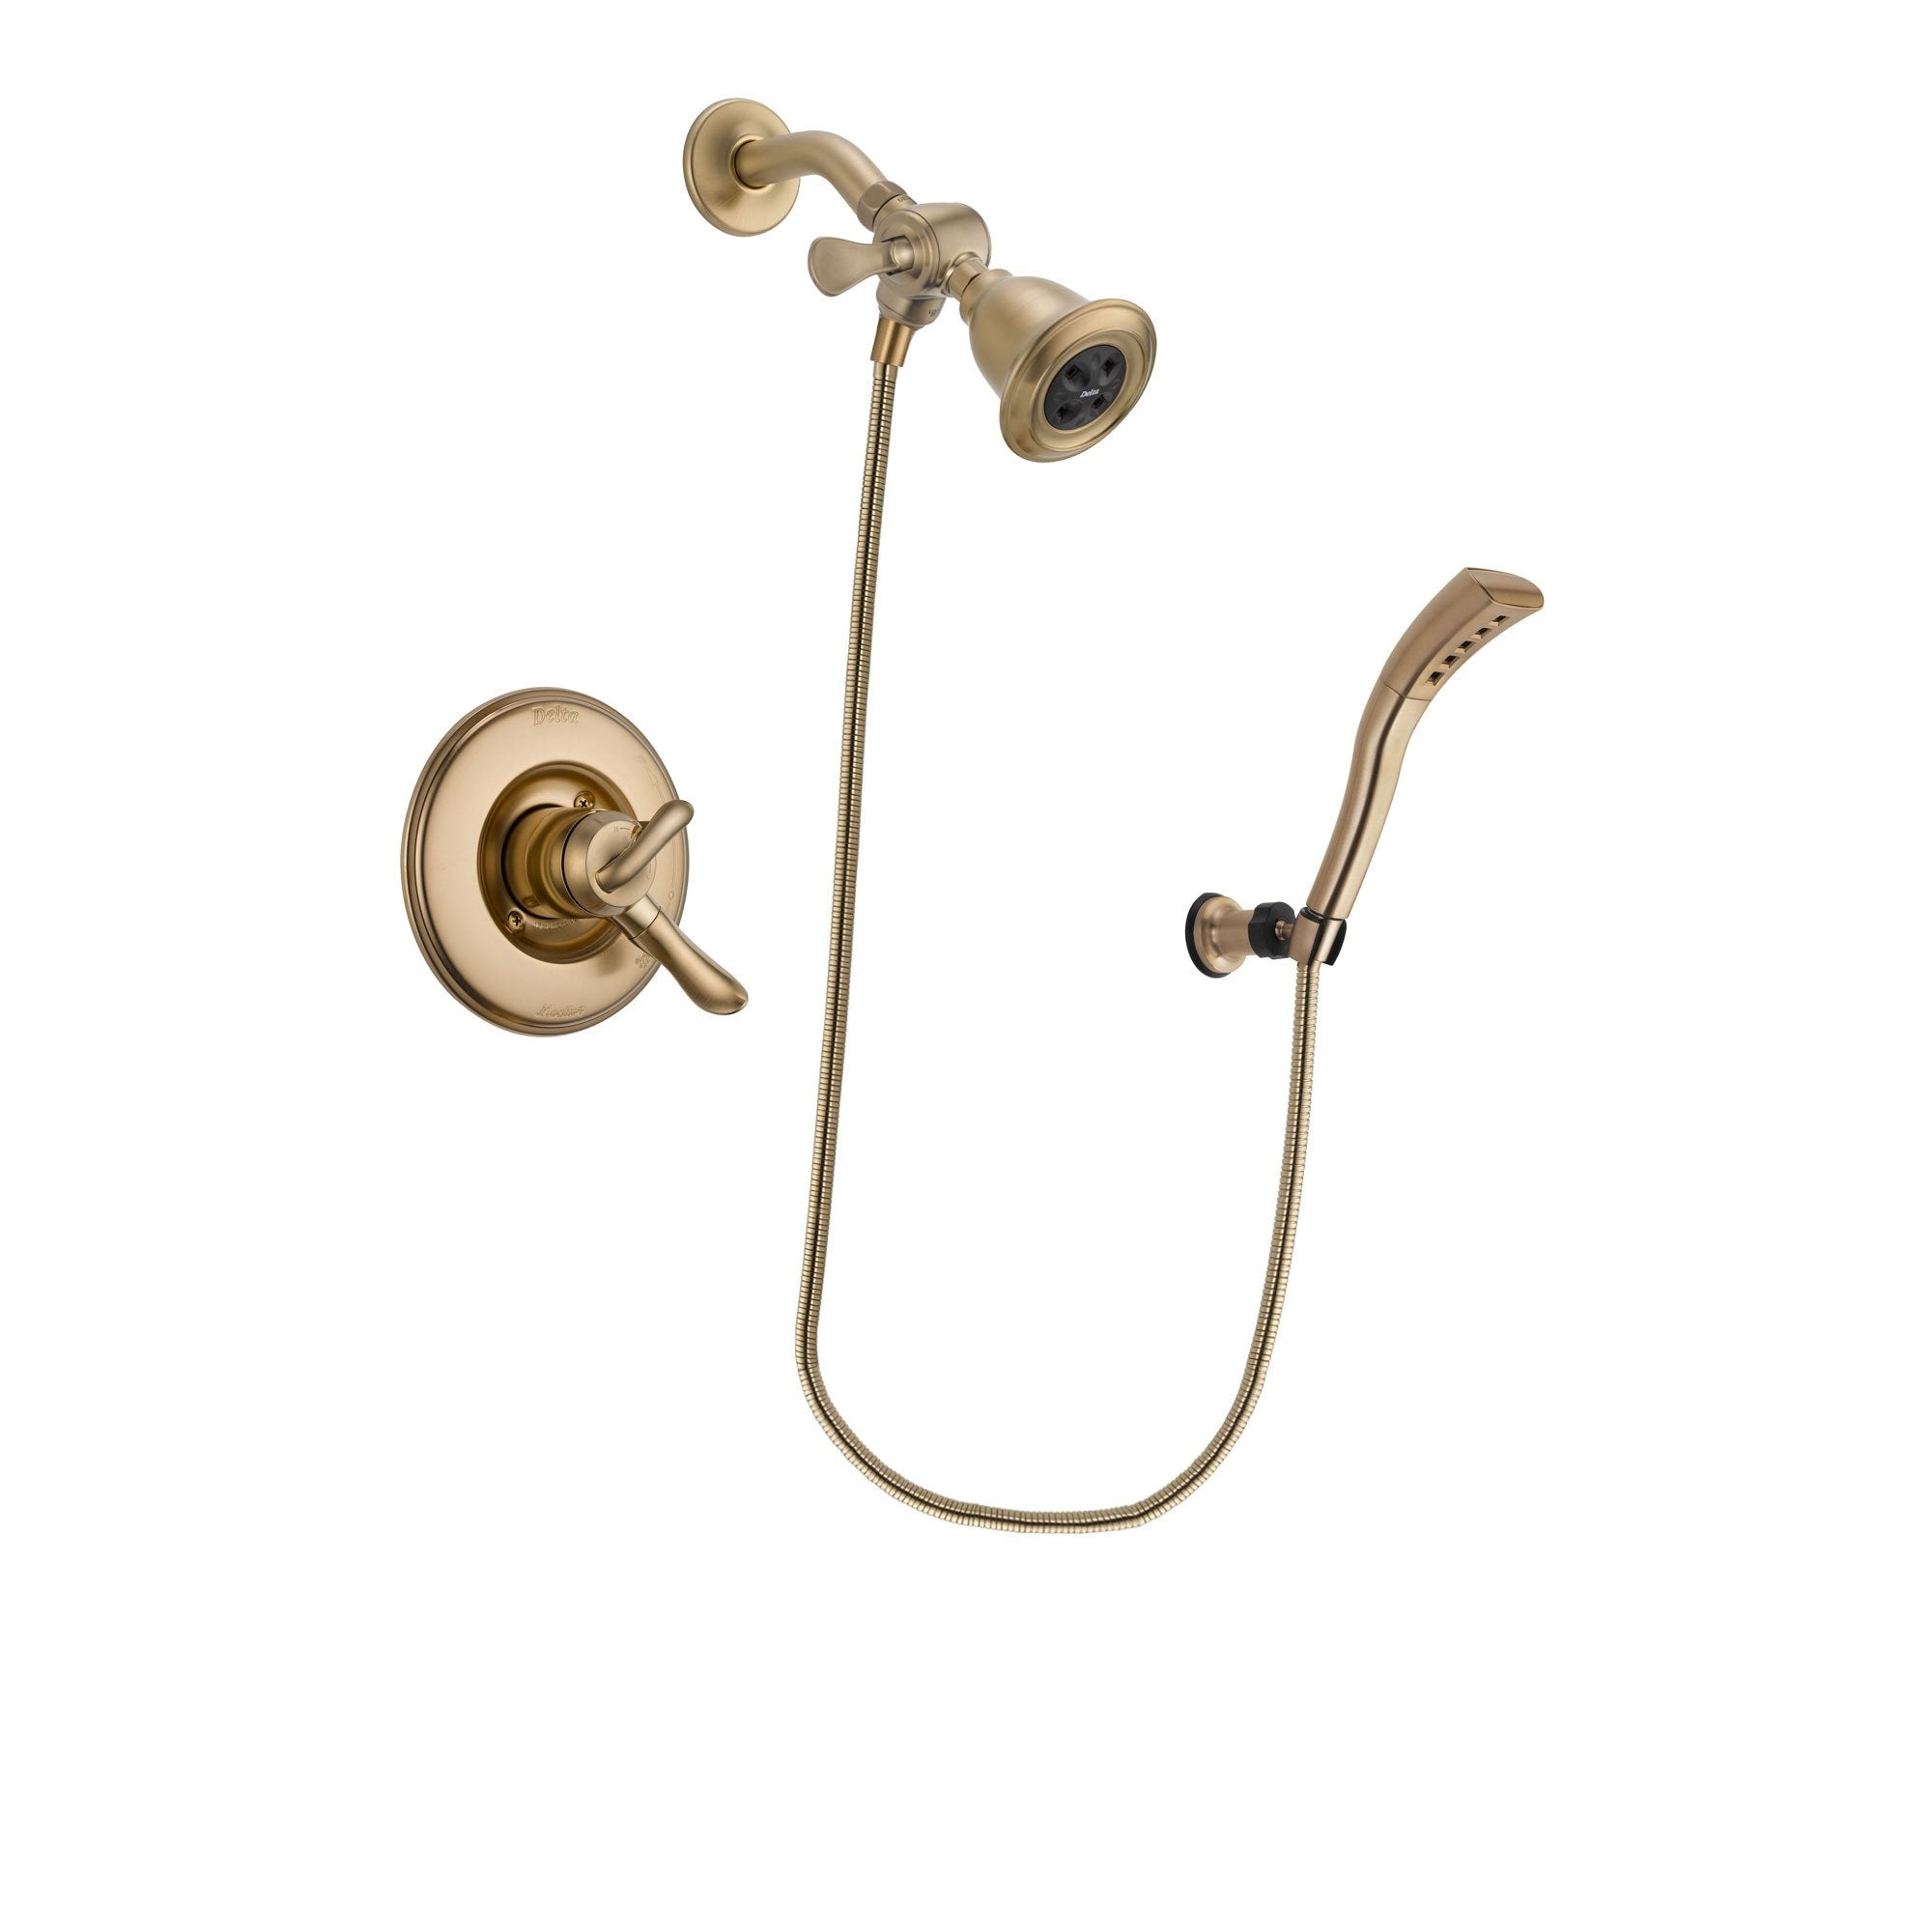 Delta Linden Champagne Bronze Finish Dual Control Shower Faucet System Package with Water Efficient Showerhead and Modern Wall Mount Personal Handheld Shower Spray Includes Rough-in Valve DSP3678V